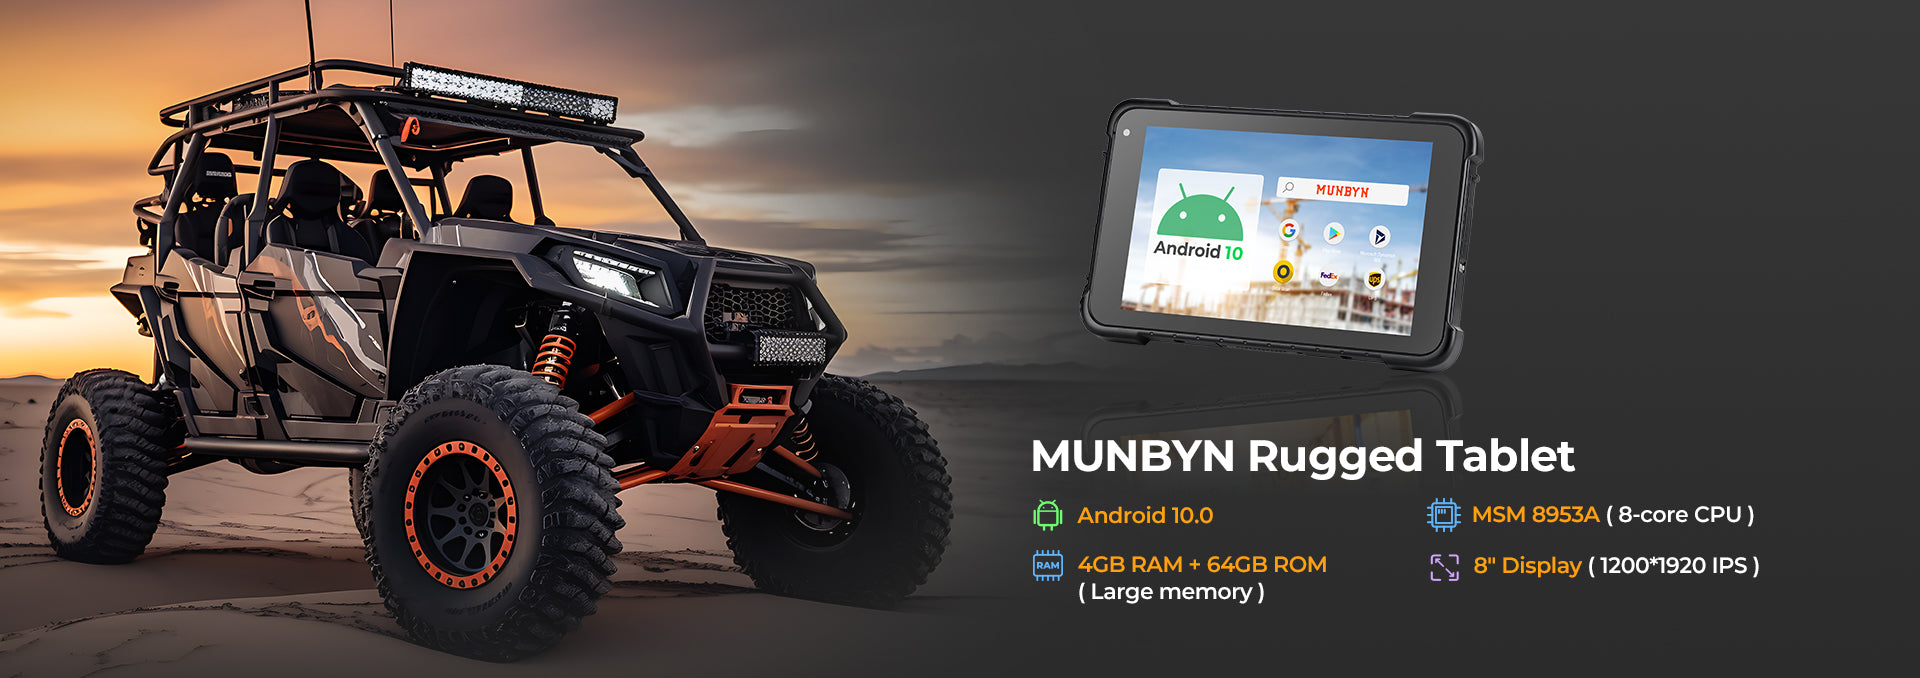 MUNBYN Rugged Android Tablet